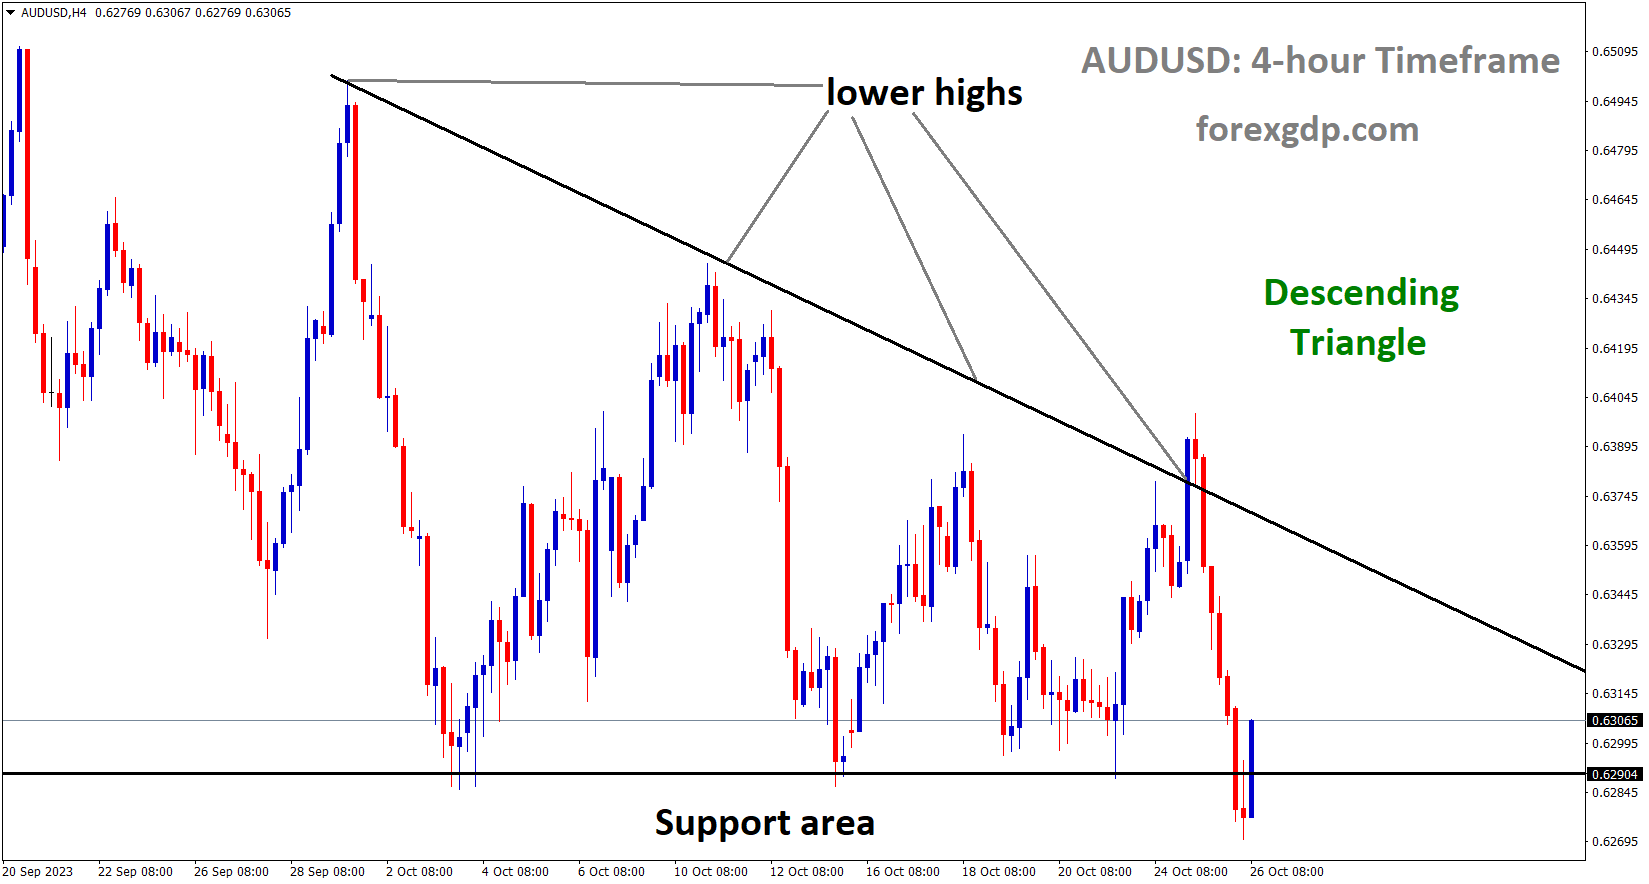 AUDUSD is moving in the Descending triangle pattern and the market has rebounded from the support area of the pattern